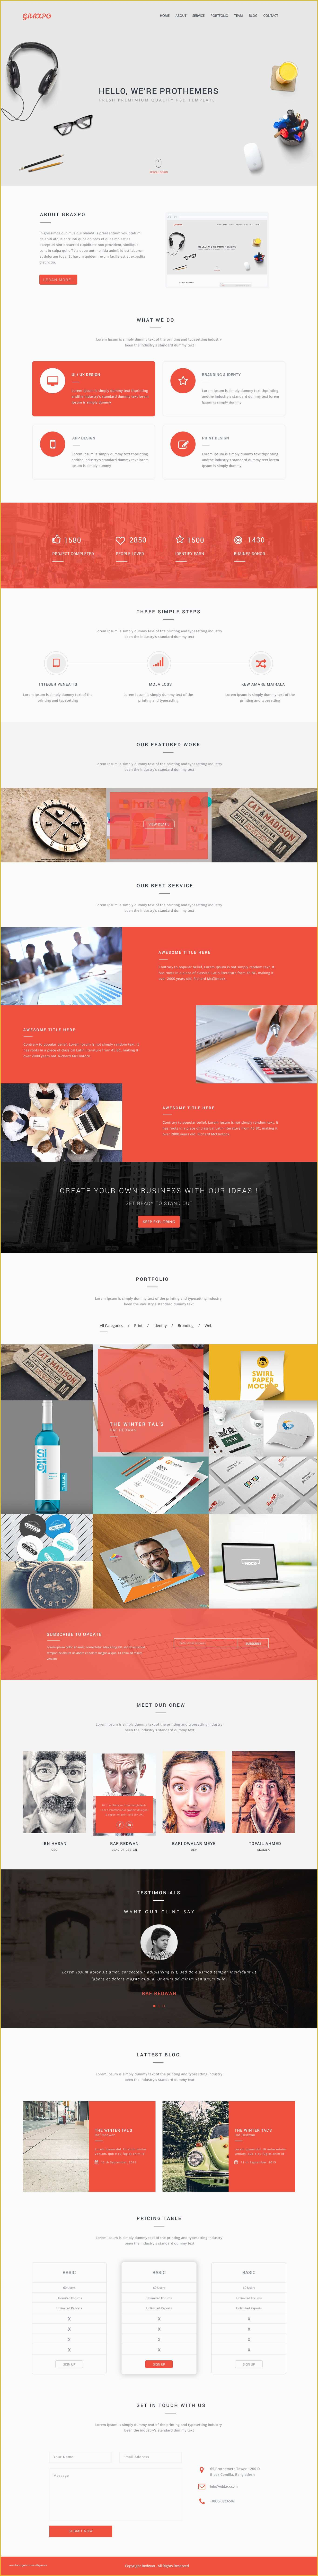 One Page Portfolio Template Free Download Of Graxpo E Page Portfolio Template Free